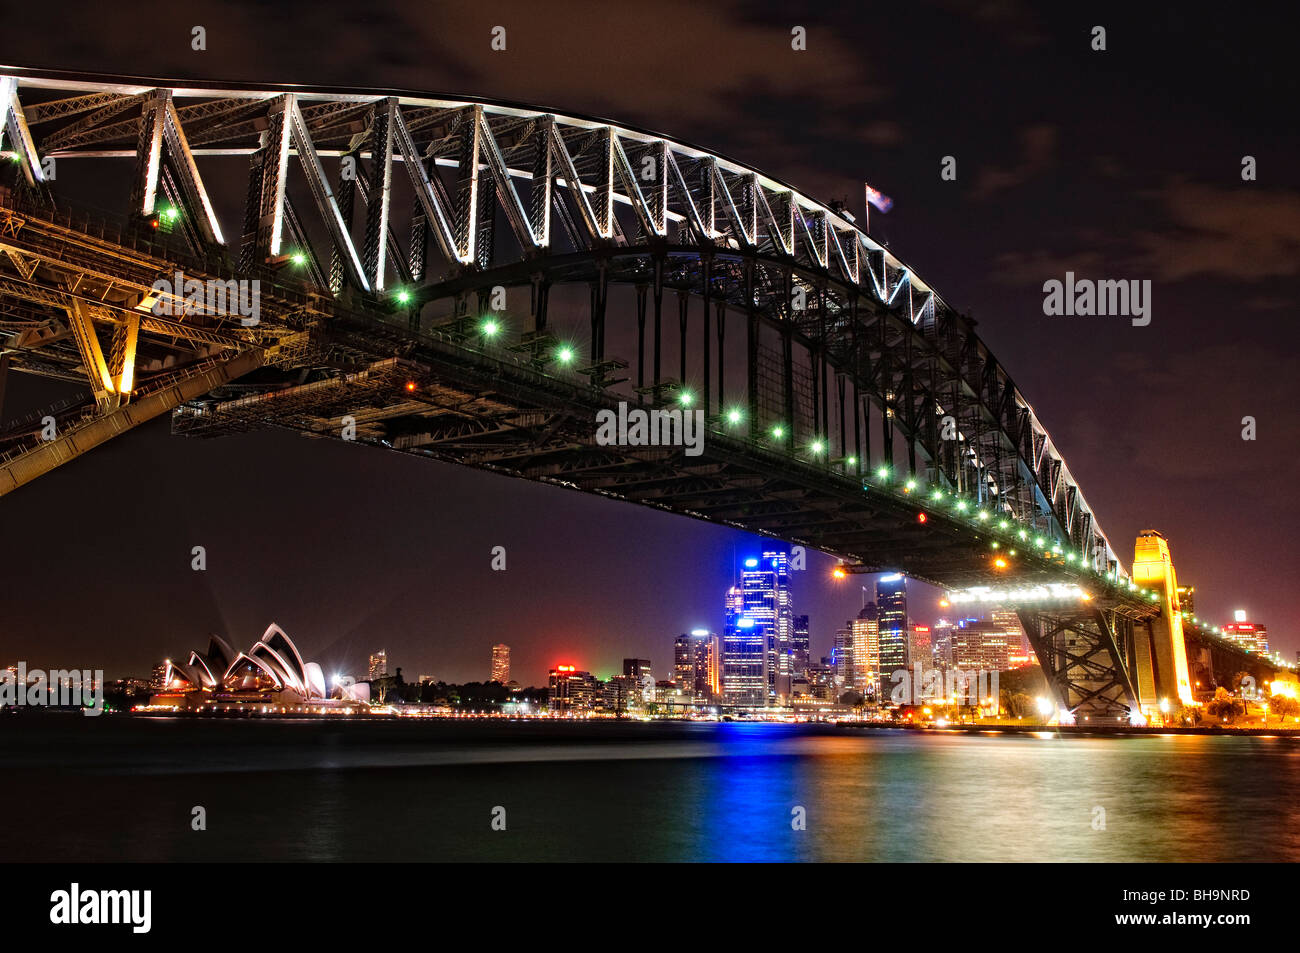 SYDNEY, Australia - SYDNEY, Australia - Night shot of Sydney Harbour Bridge and skyline of Sydney city looking back towards Dawes Point and taken from Milsons Point. The Sydney Opera House is at extreme left. Dawes Point is at right Stock Photo